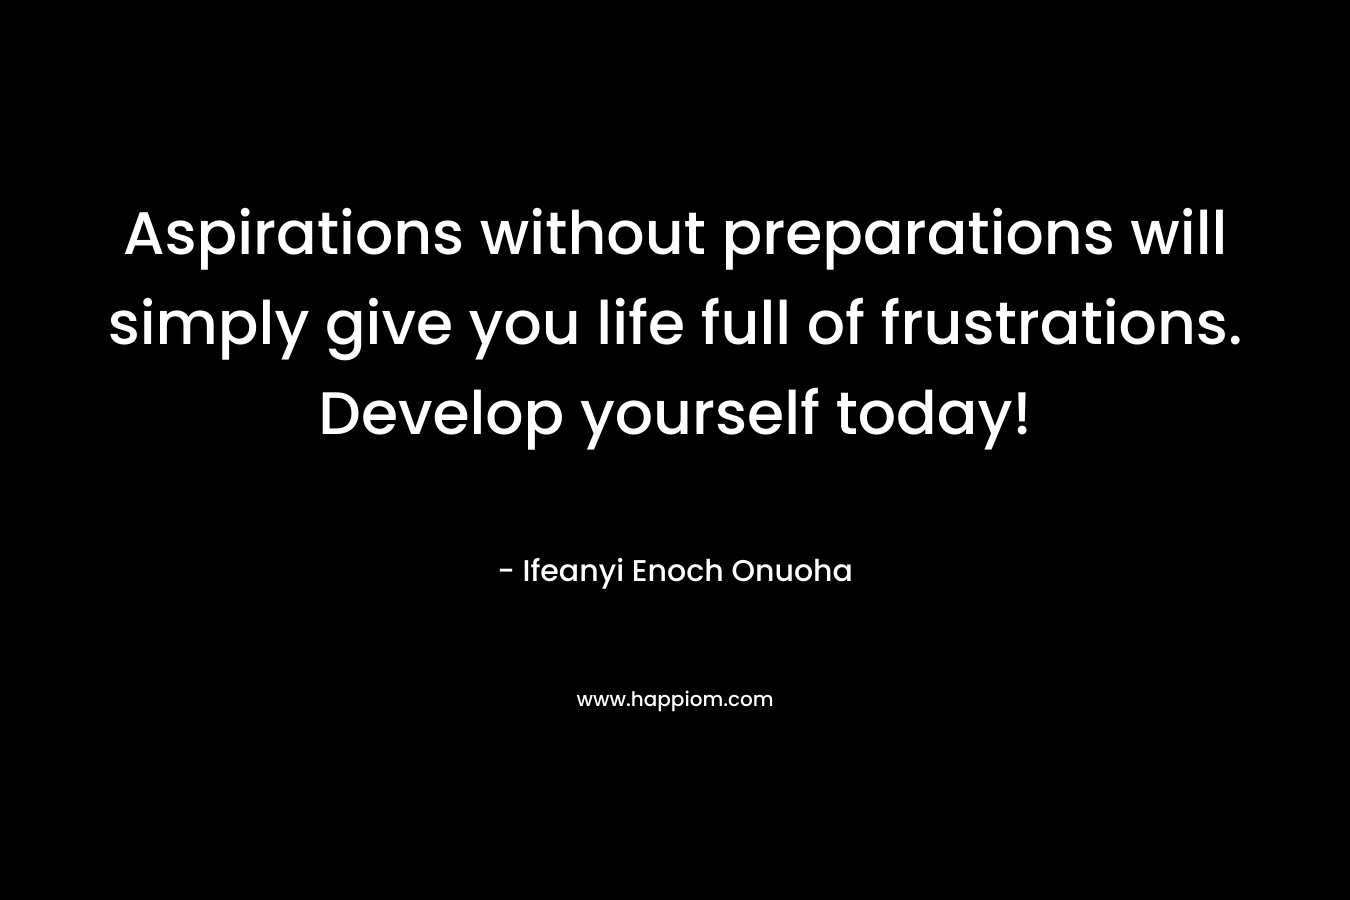 Aspirations without preparations will simply give you life full of frustrations. Develop yourself today!